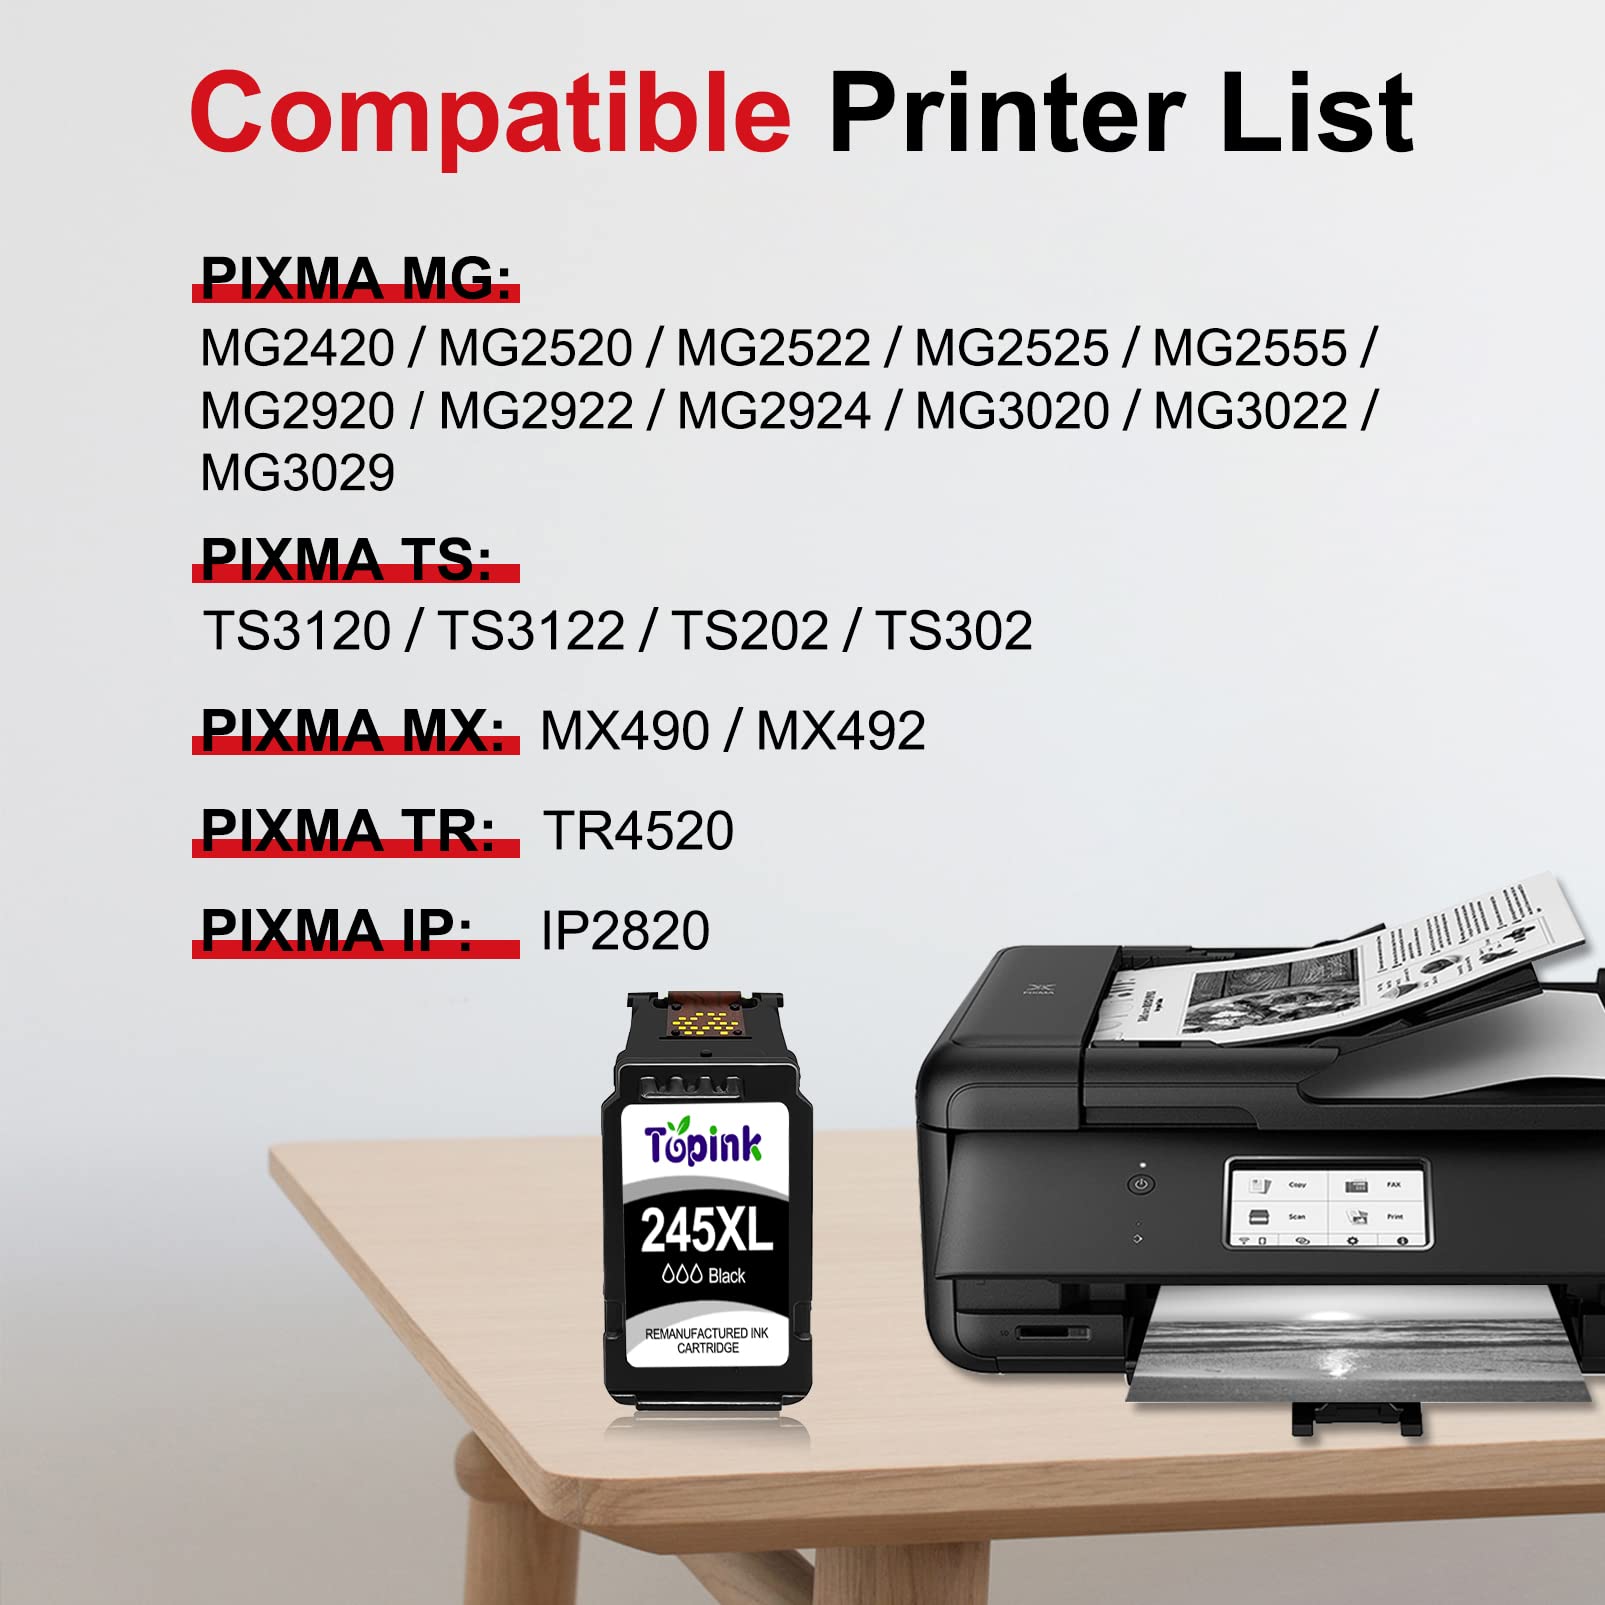 Printer Ink 245 Black XL Ink Cartridge for Canon Pixma PG-245 PG-245XL PG 245 XL PG 243 PG-243 Fine Cartridge Replacement for Cannon MX490 MX492 MG2522 TS3100 TS3122 TS3300 TS3322 TS3320 TR4520